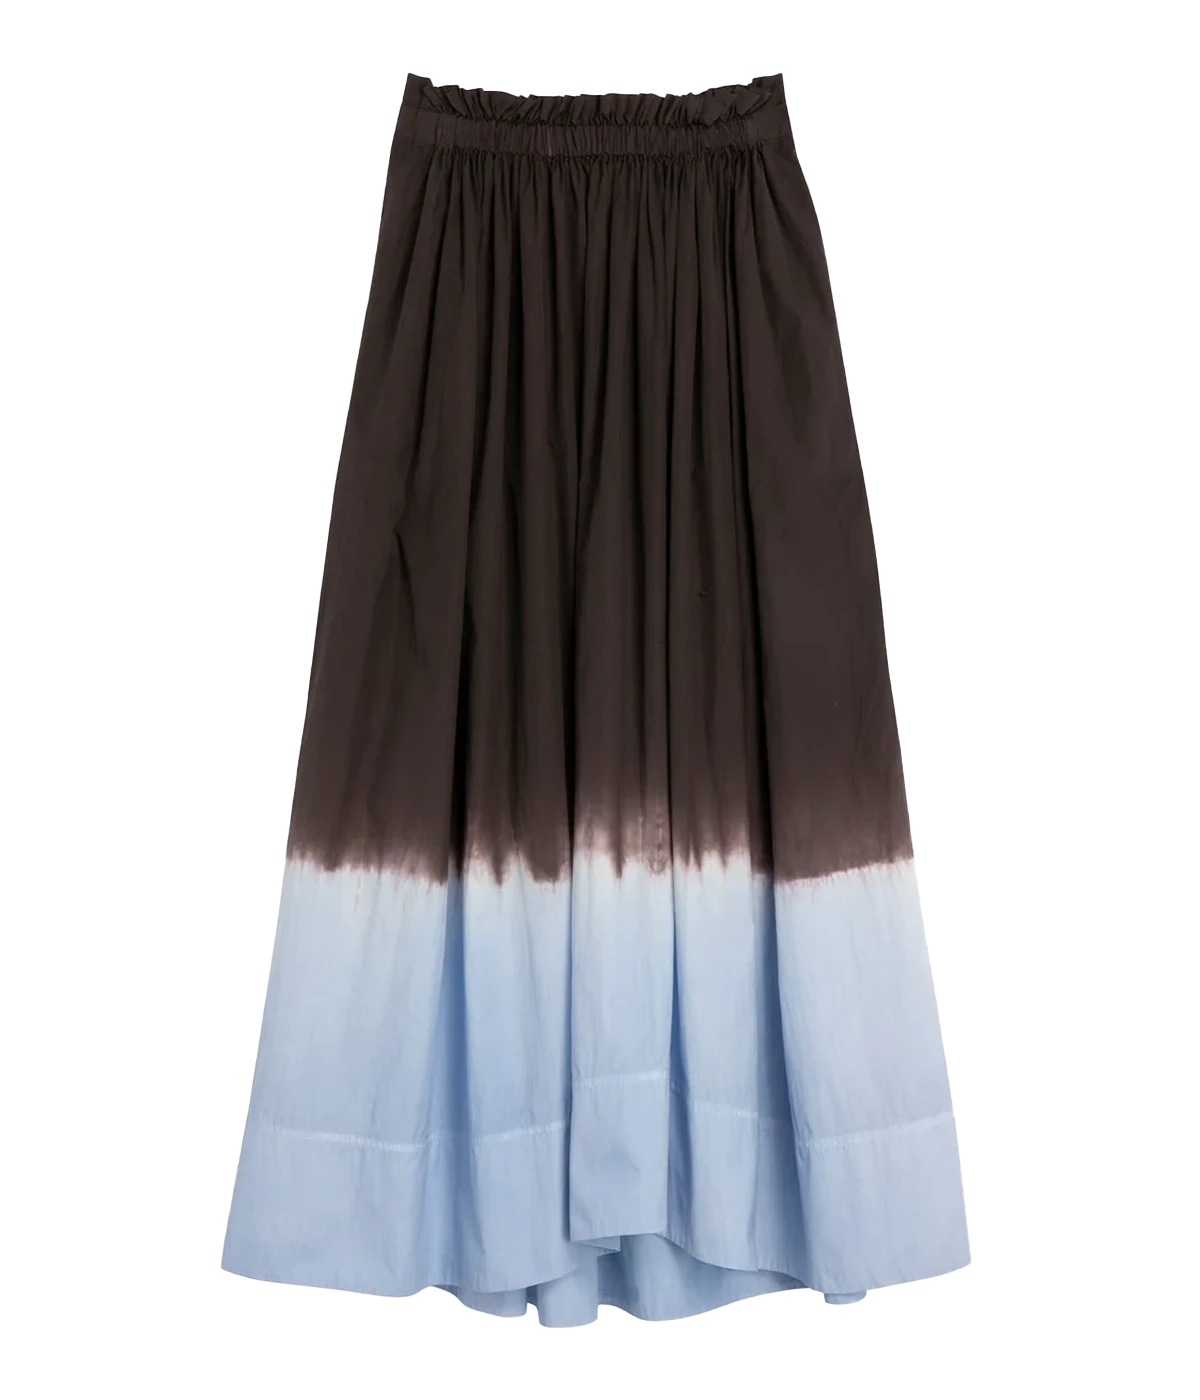 Gina Skirt in Sky Blue and Fudge